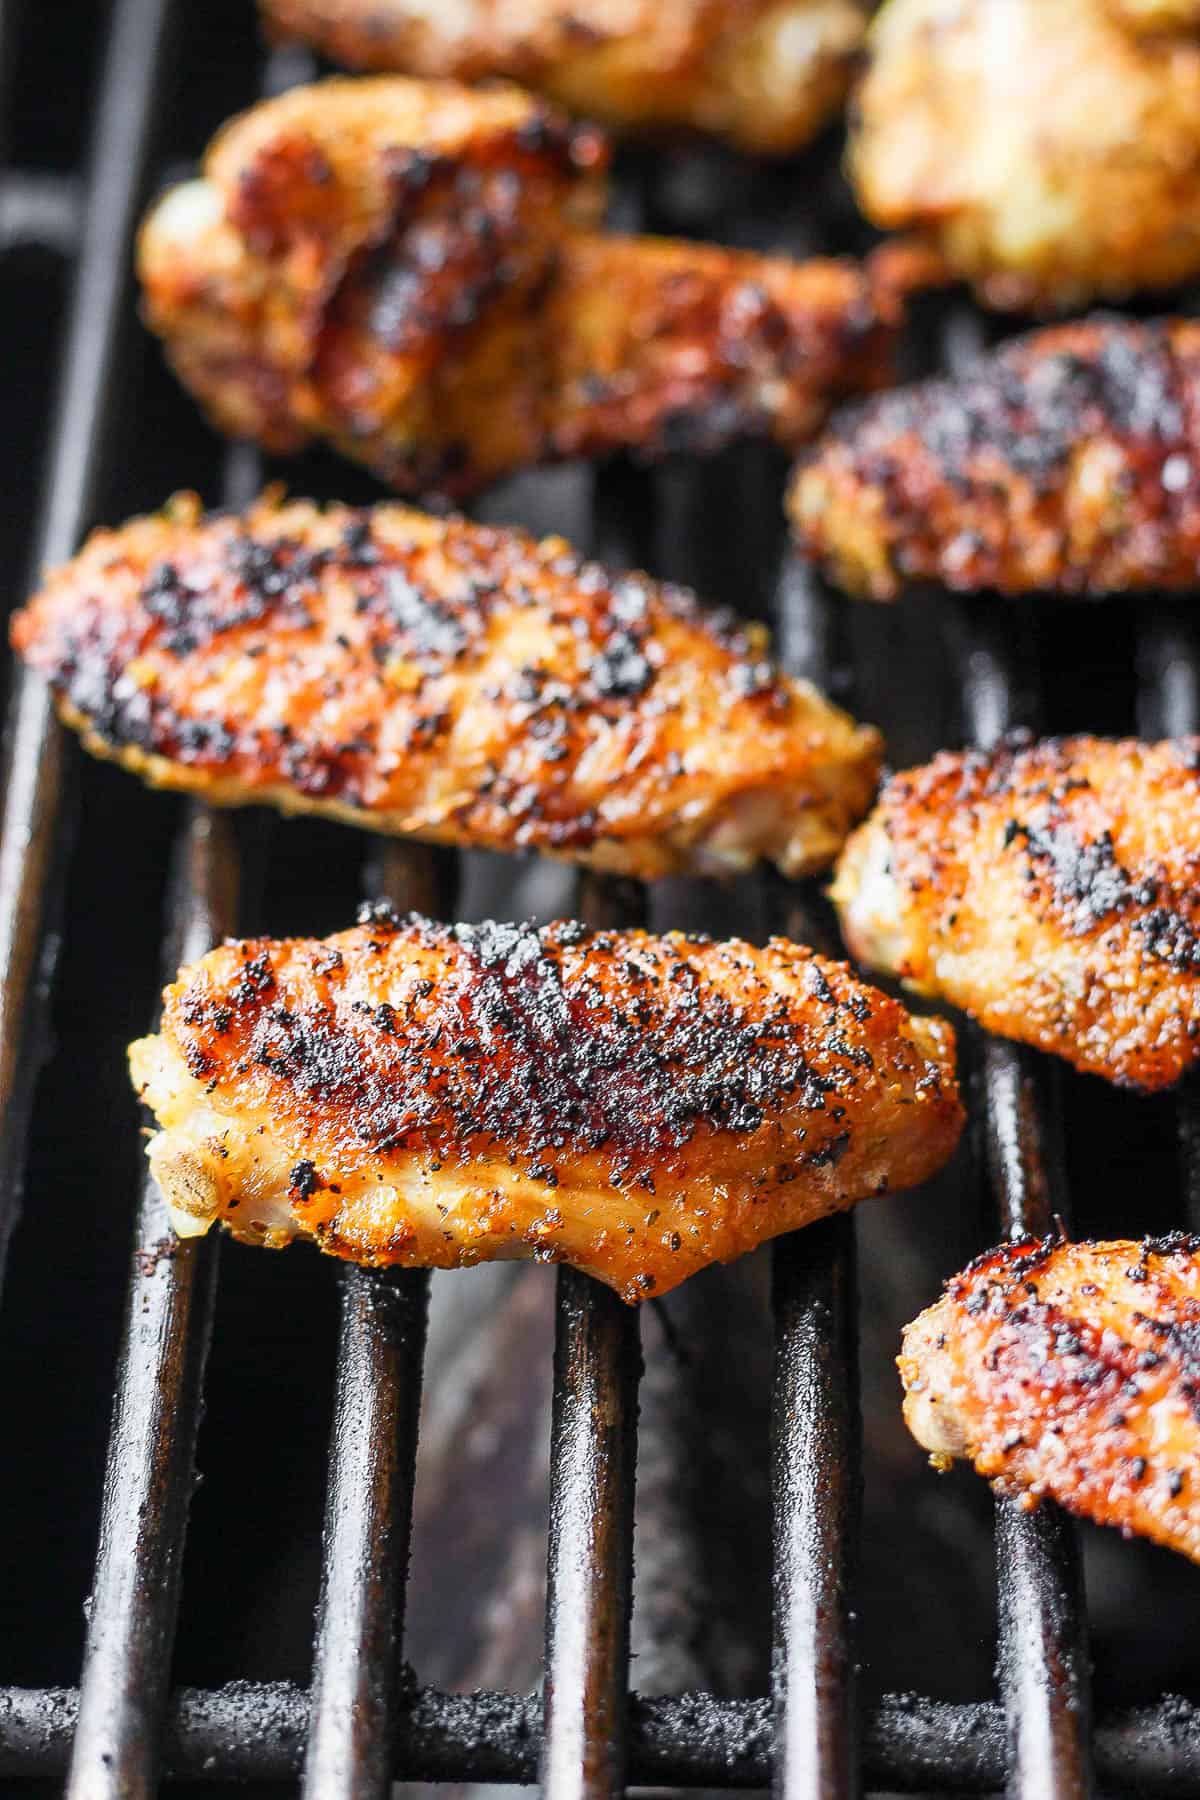 Seasoned chicken wings on the grill grates.